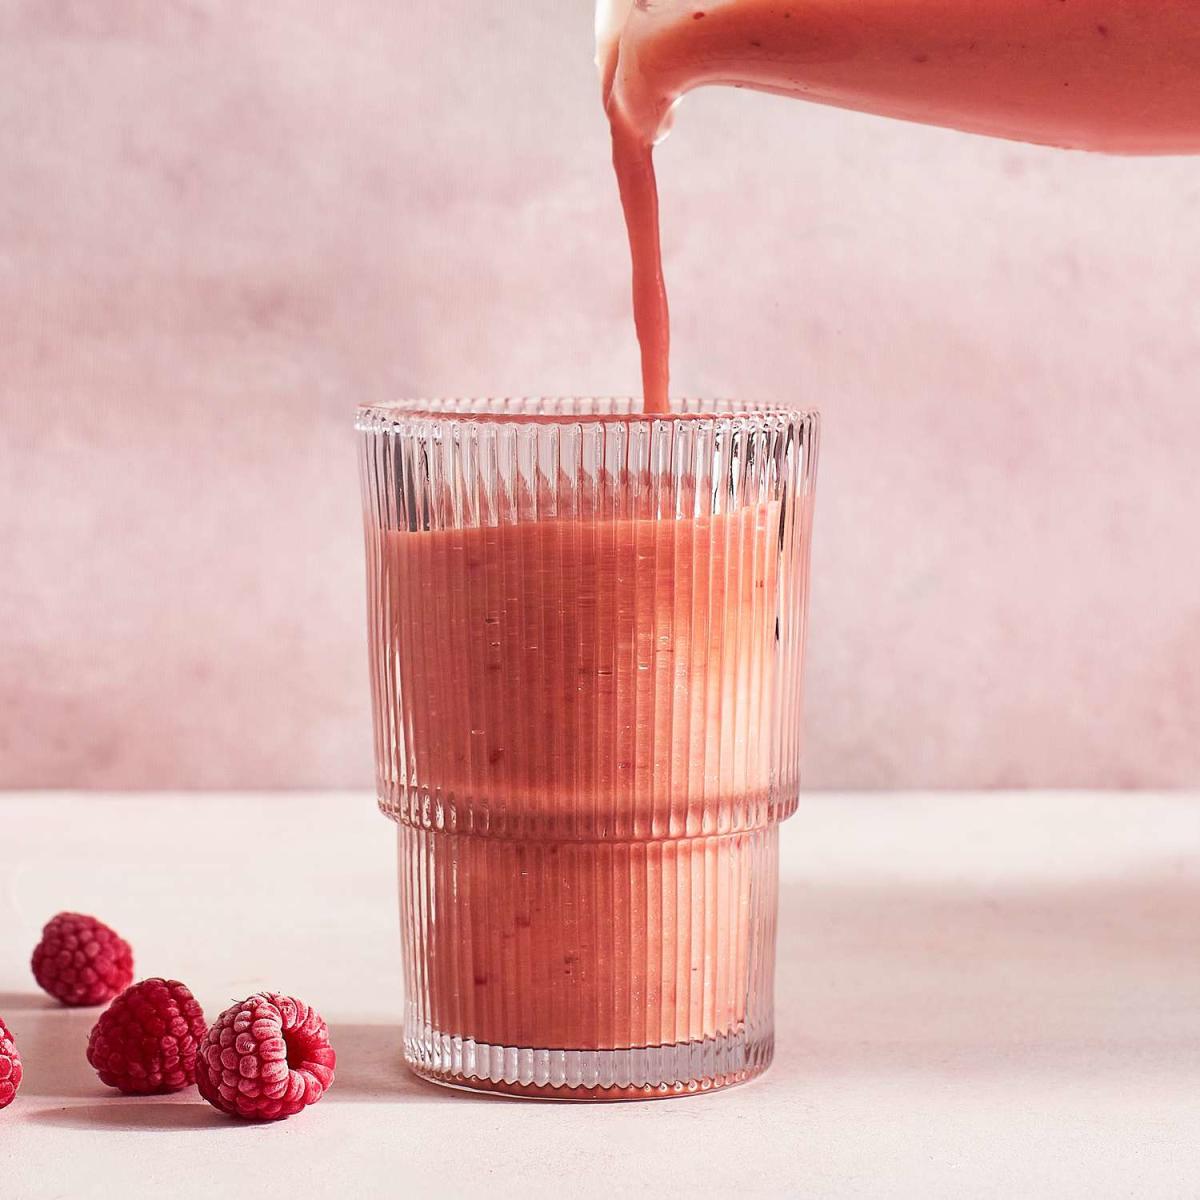 A Brain-Boosting Smoothie to Make For Breakfast - Yahoo Sports